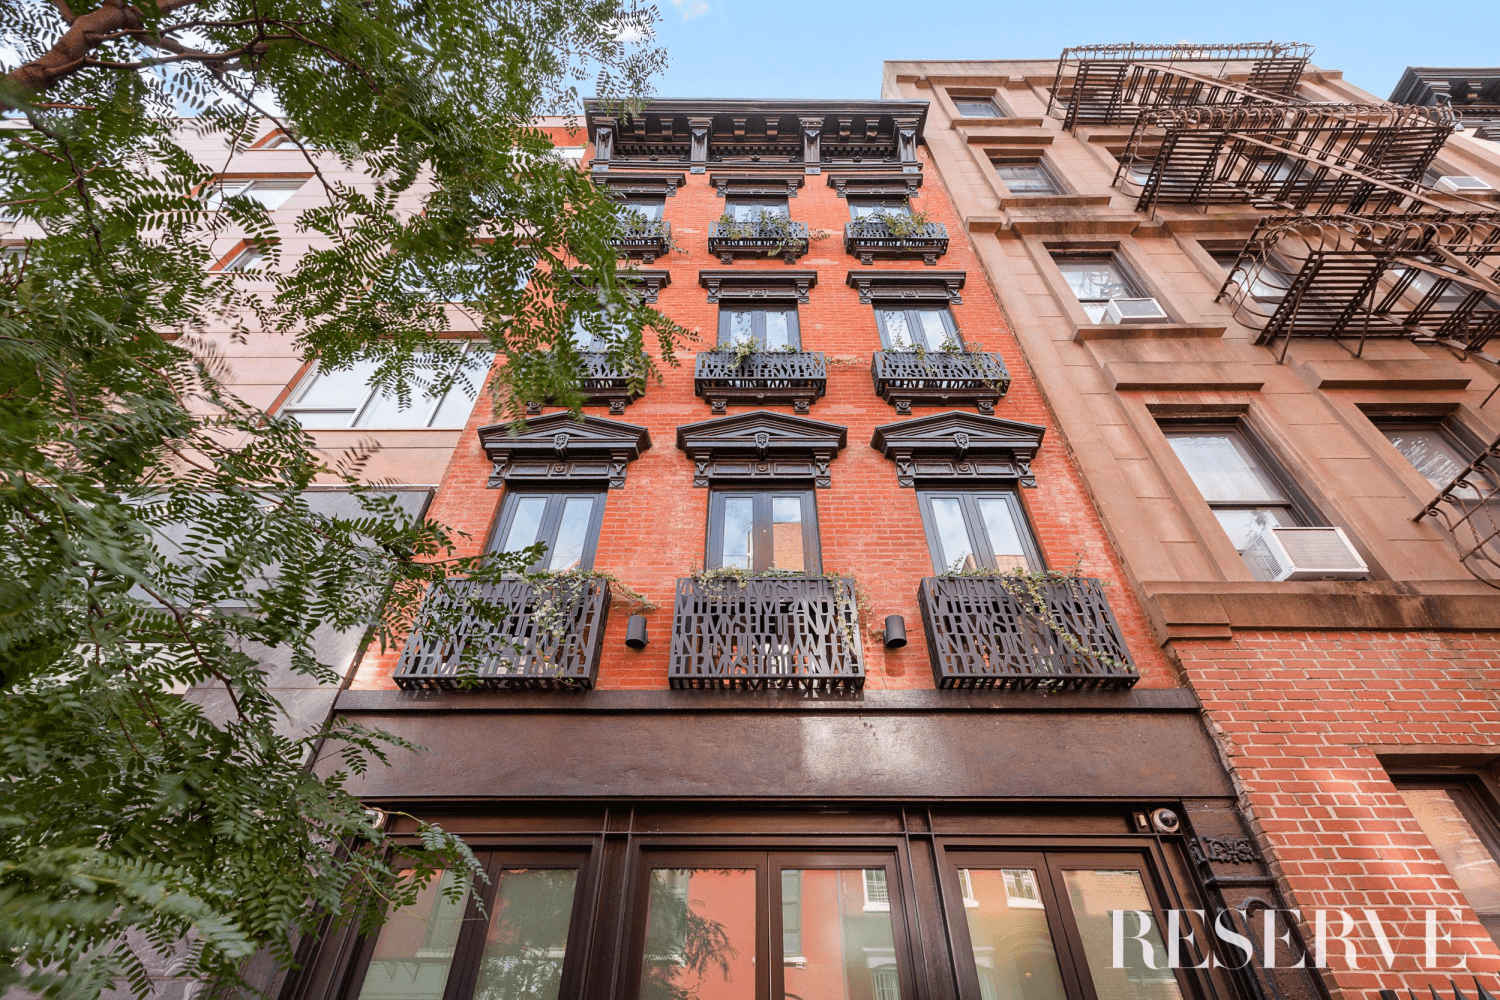 Open the door of 304 West 18th Street and find yourself in an urban oasis.